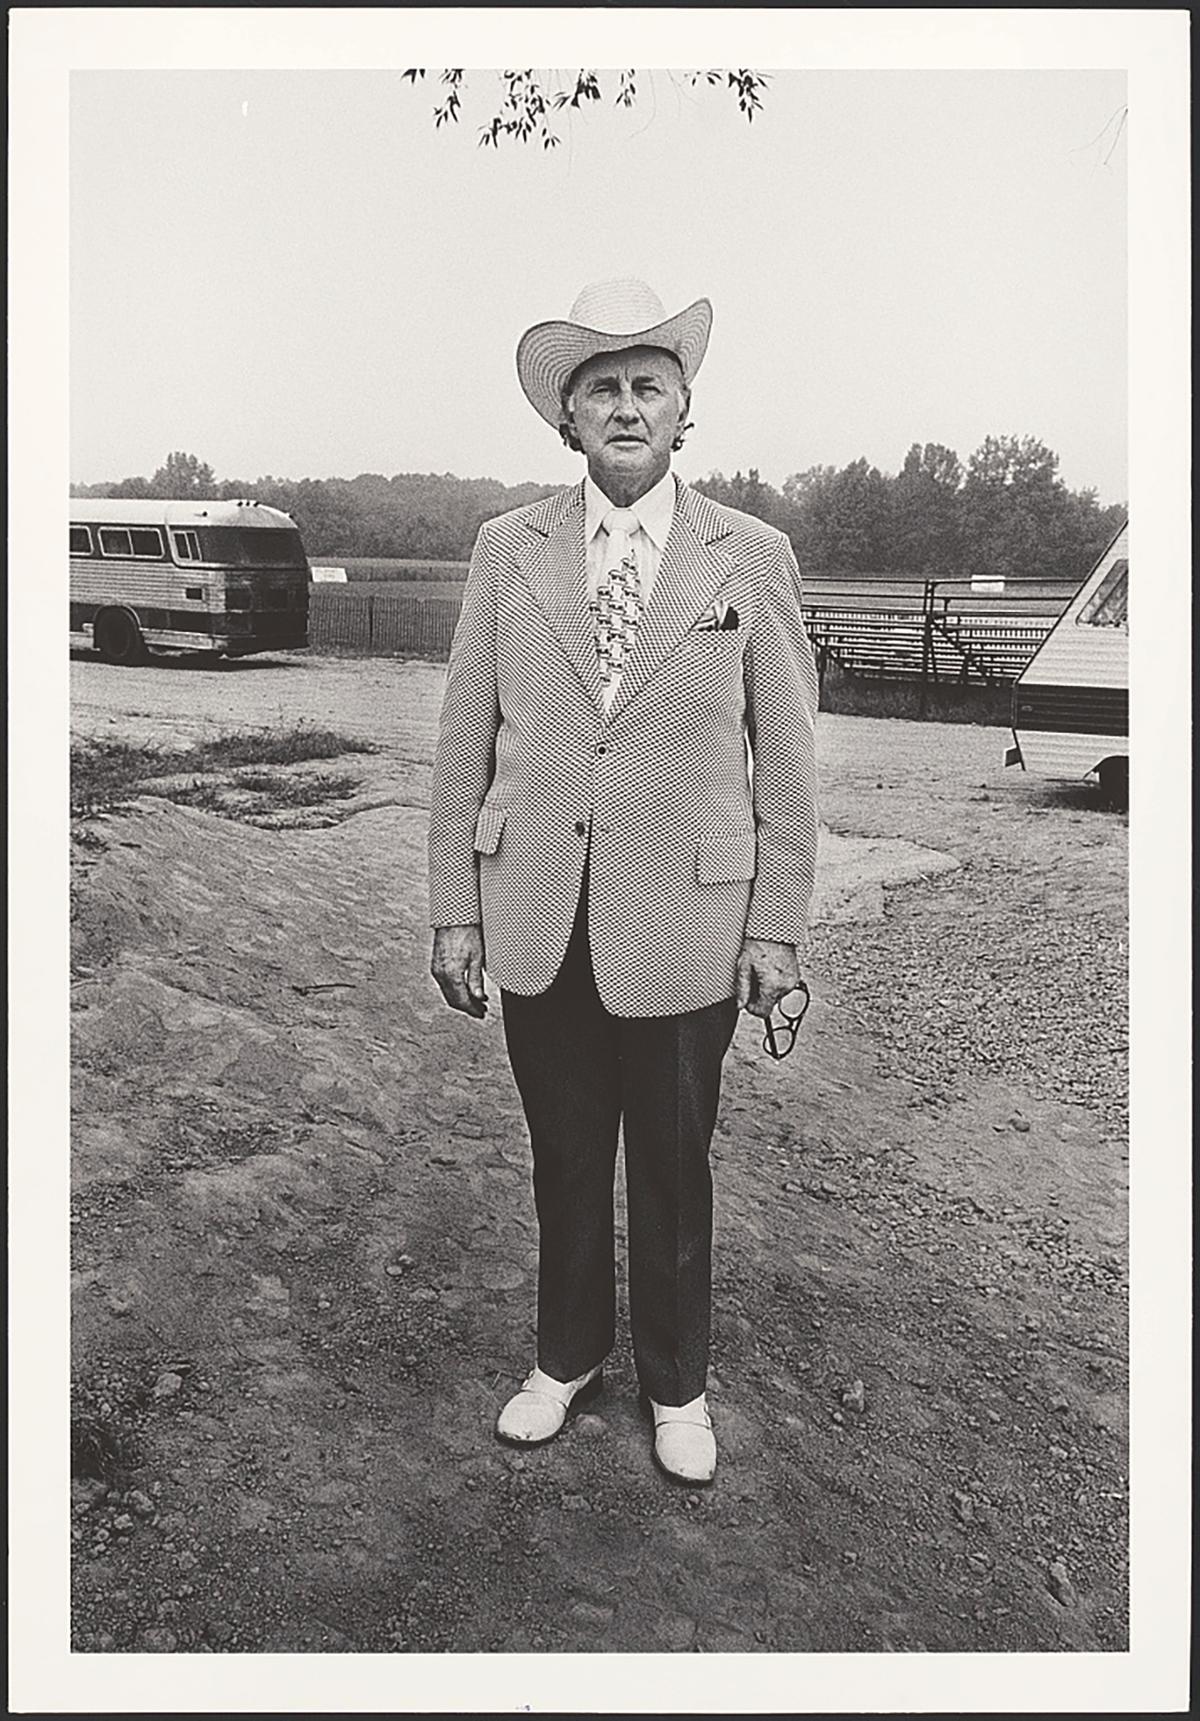 "Bill Monroe, Take It Easy Ranch, Callaway, Maryland," 1973, by photographer Henry Horenstein. Annenberg Space for Photography Collection of Exhibition Prints, Library of Congress. (Public Domain)